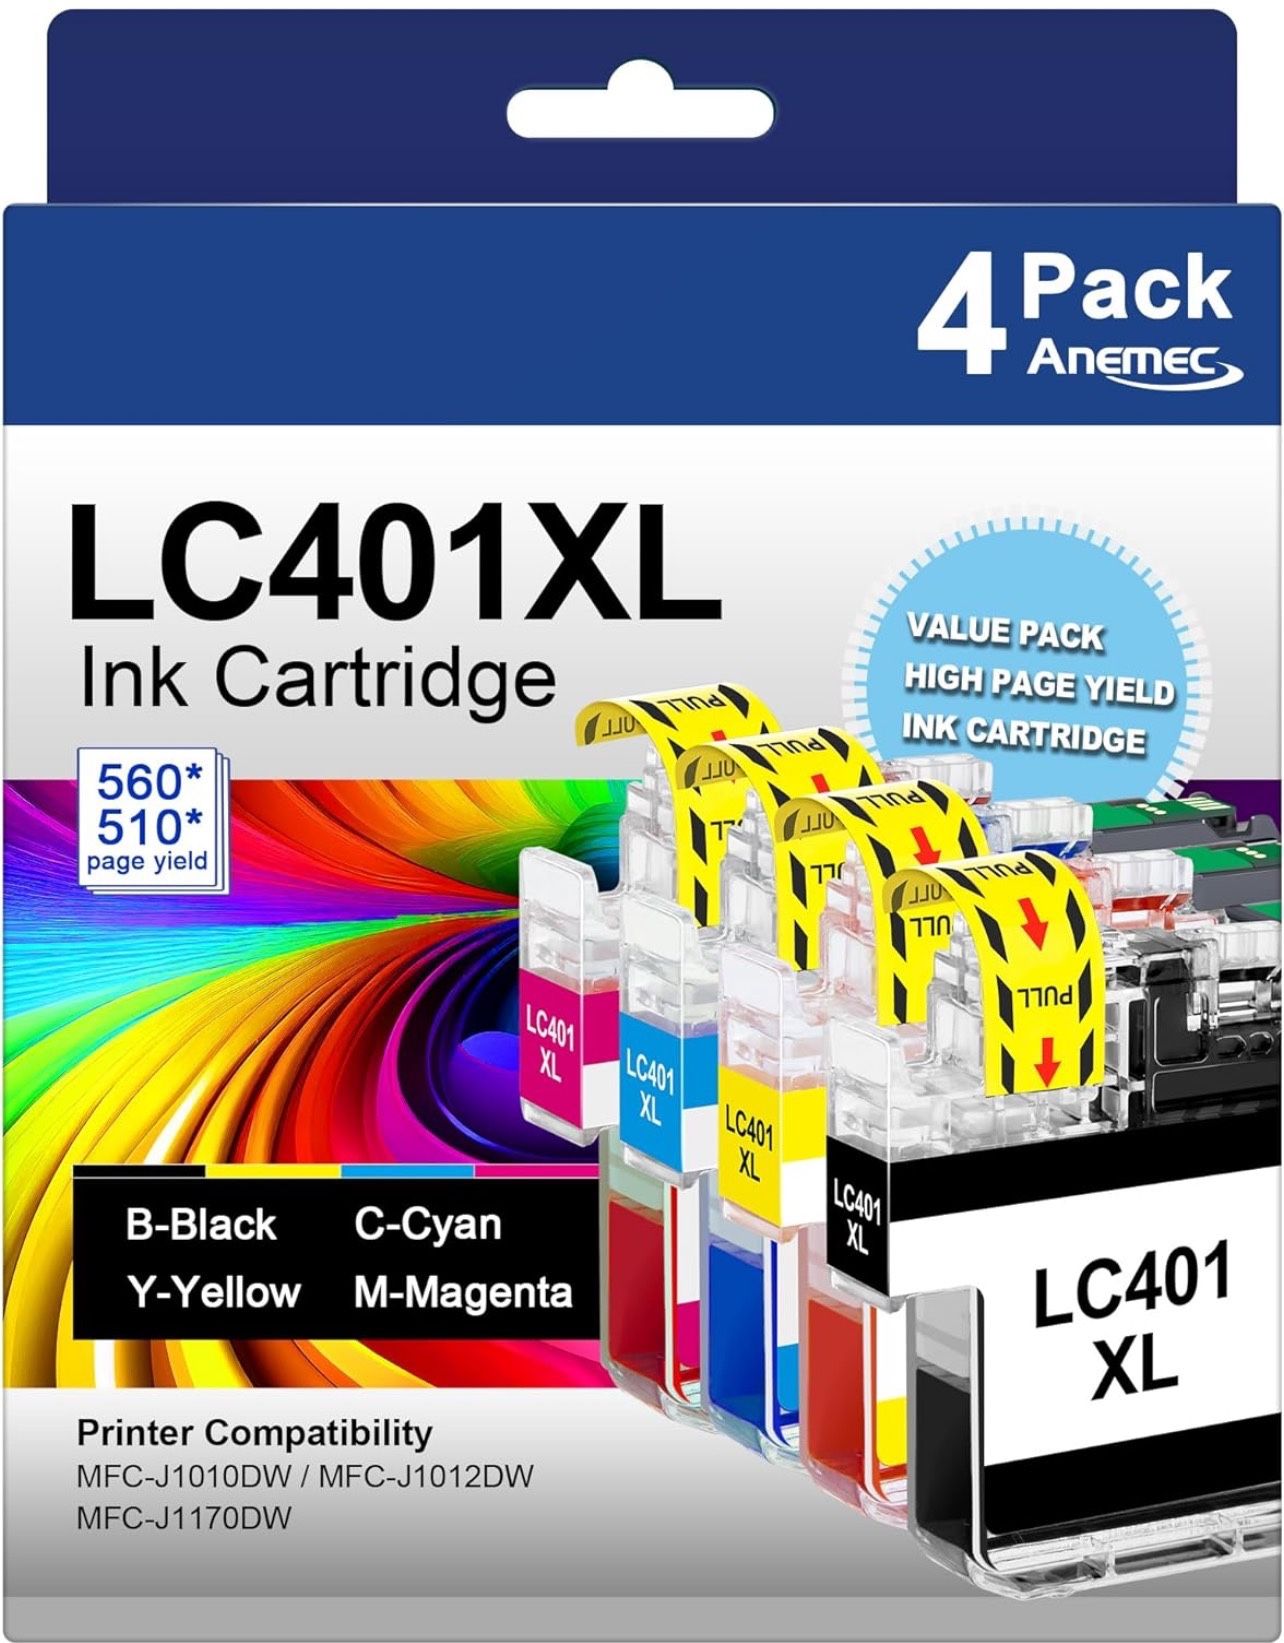 LC401XL LC401 XL Compatible Ink Cartridges Replacement for Brother LC 401 XL 401XL Work with Brother MFC-J1010DW MFC-J1012DW MFC-J1170DW Printer (4 XL